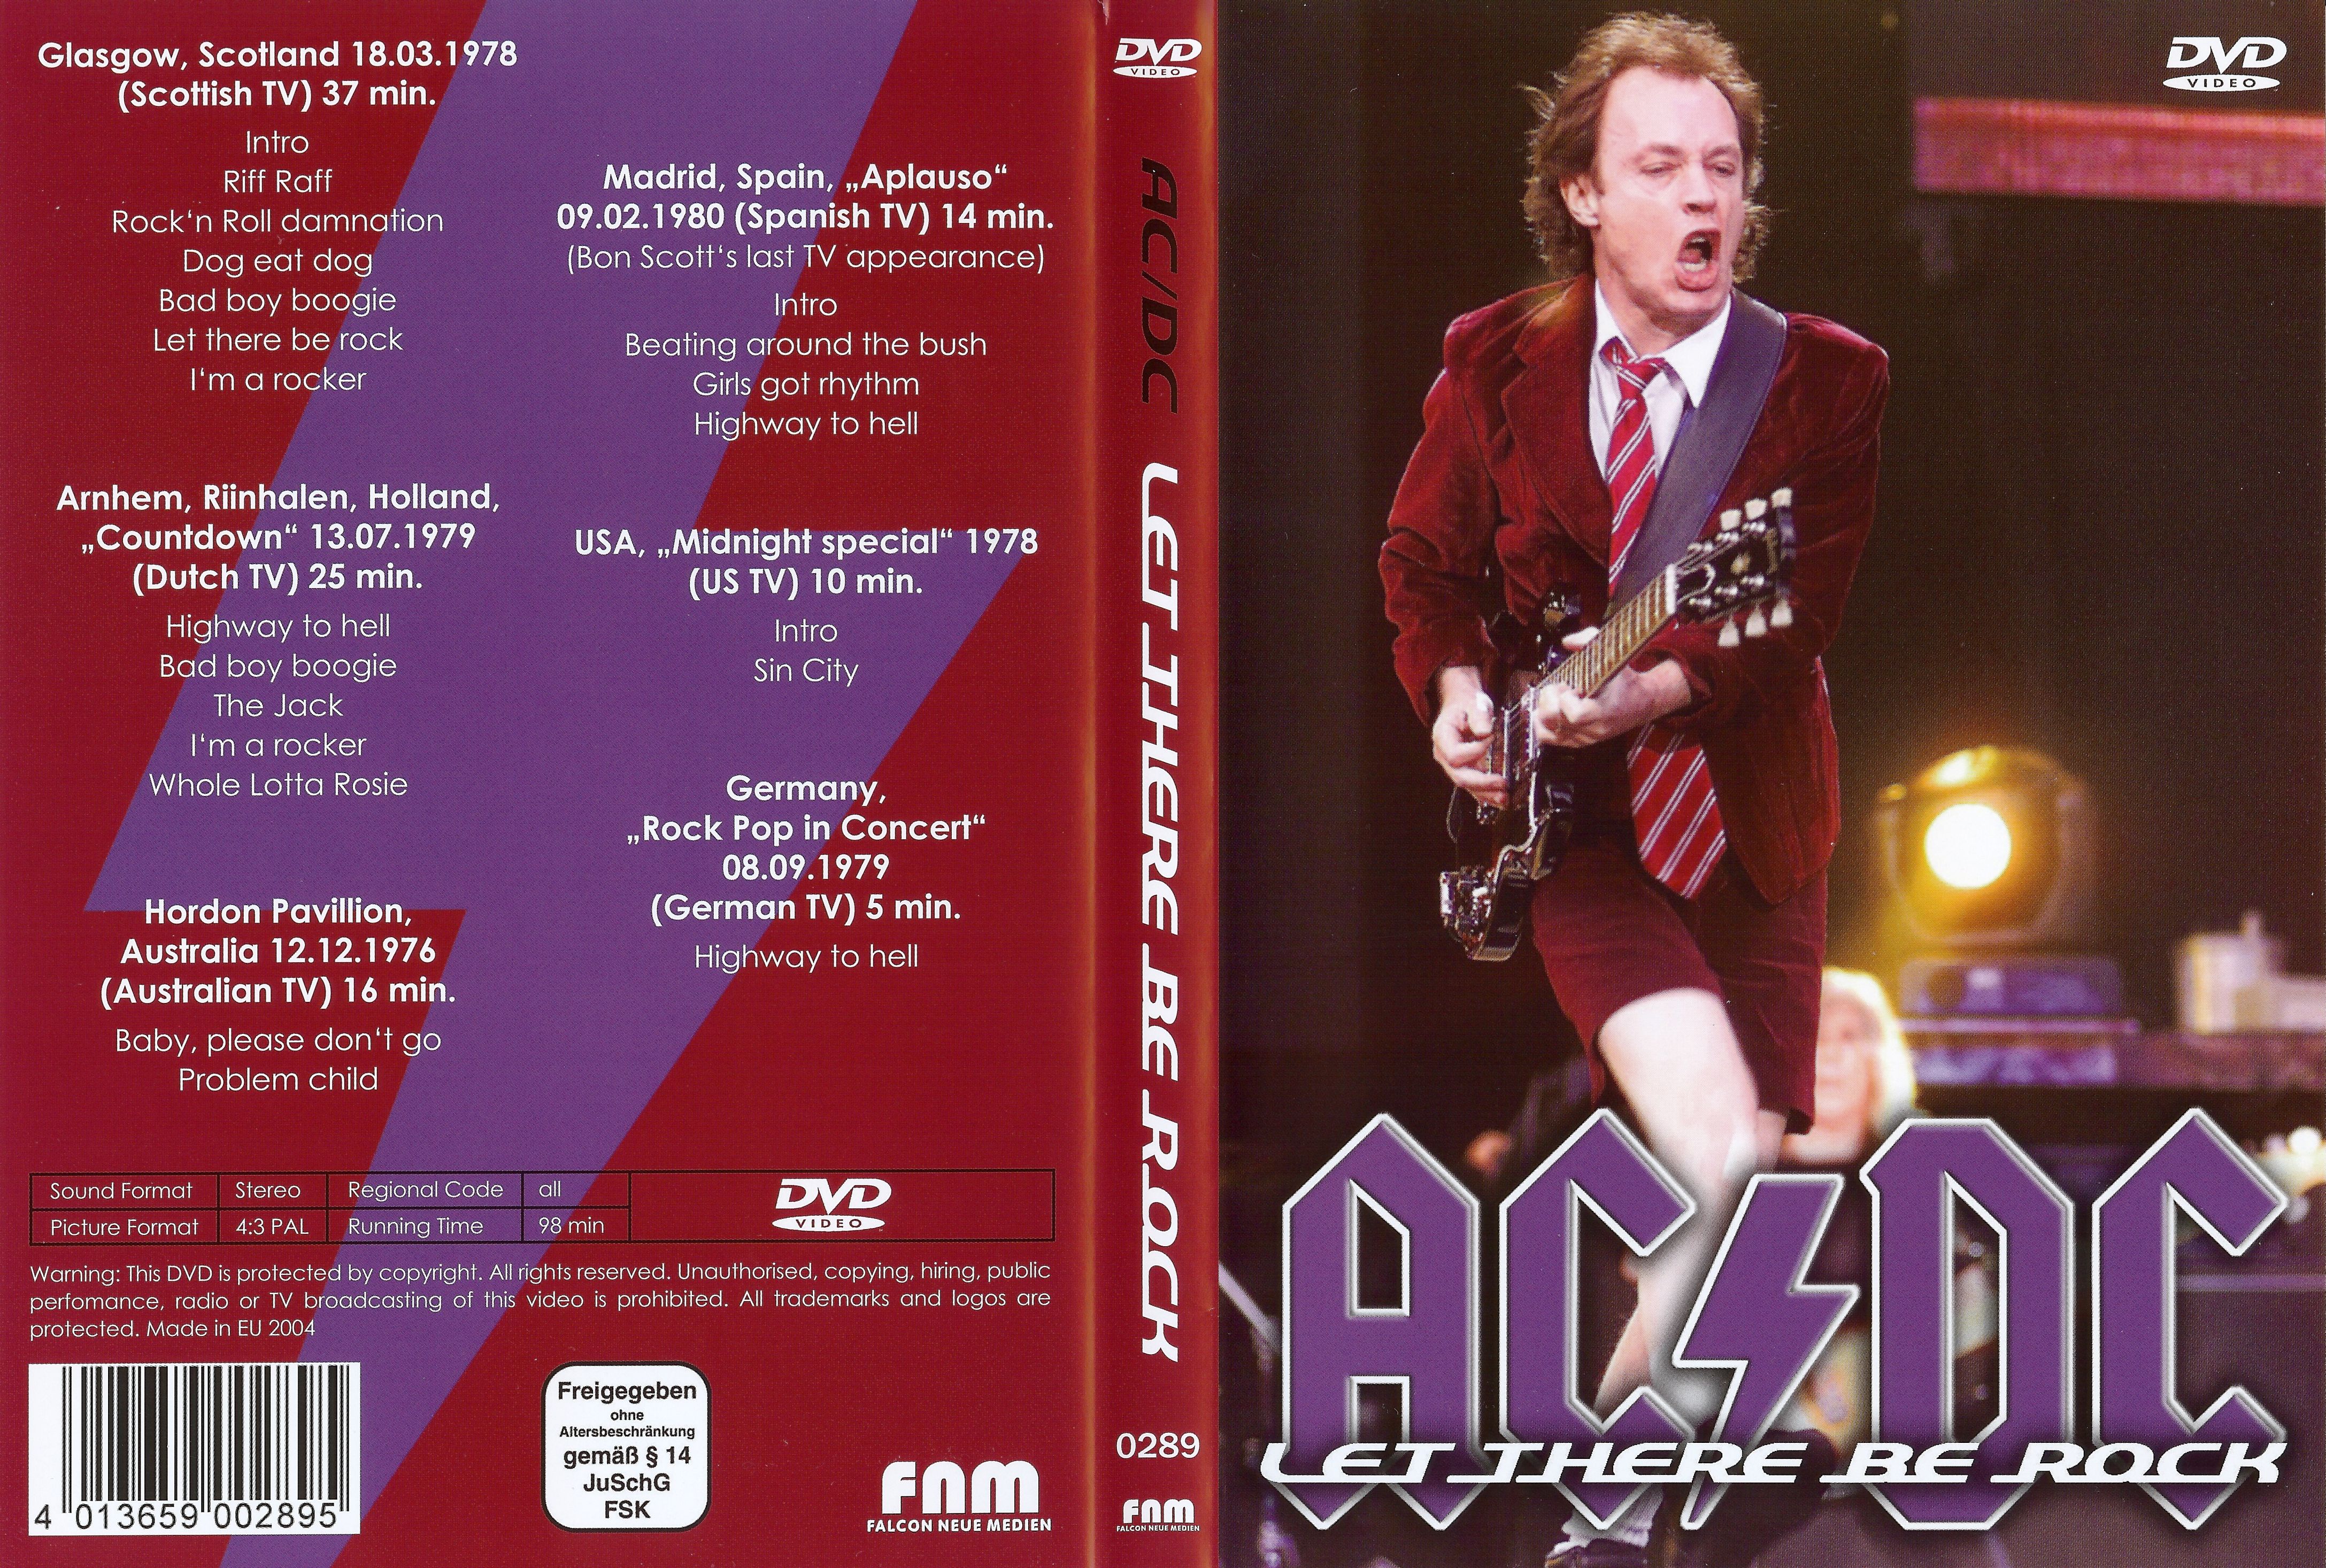 Jaquette DVD ACDC Let there be rock